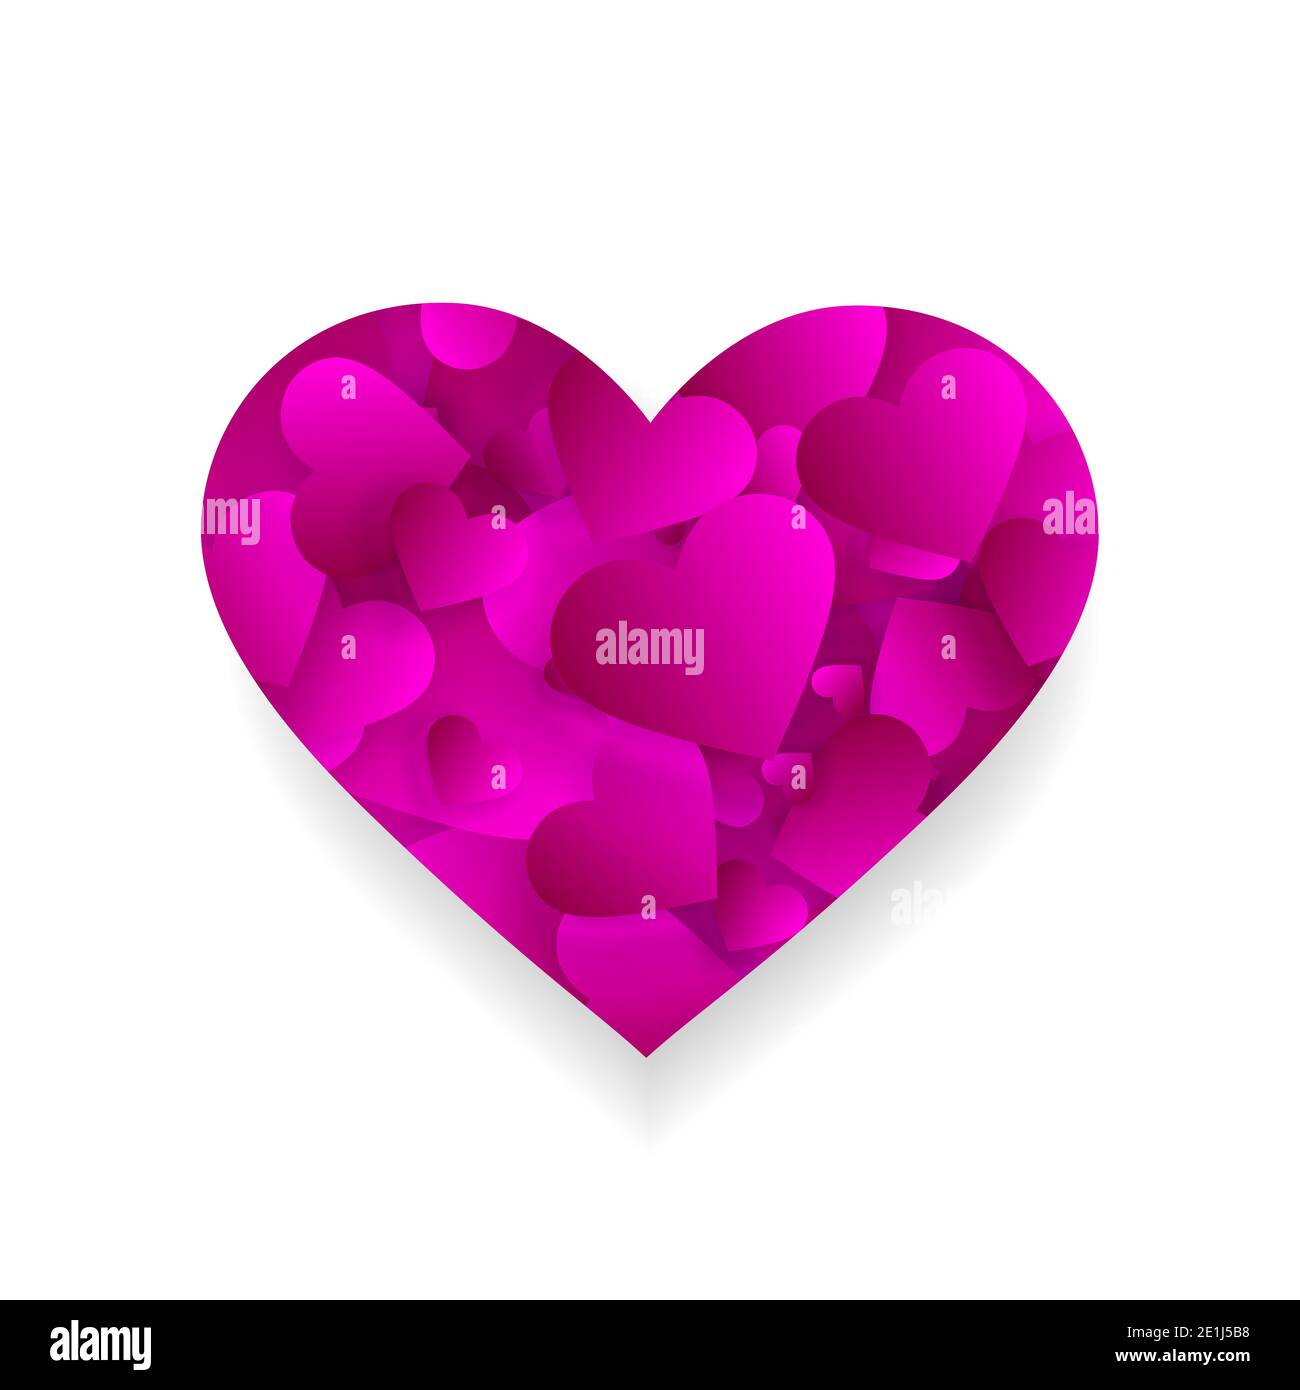 Pink heart icon 3d effect with small hearts petals inside of big shape isolated on white background. Love, marriage, romance element for valentines da Stock Photo